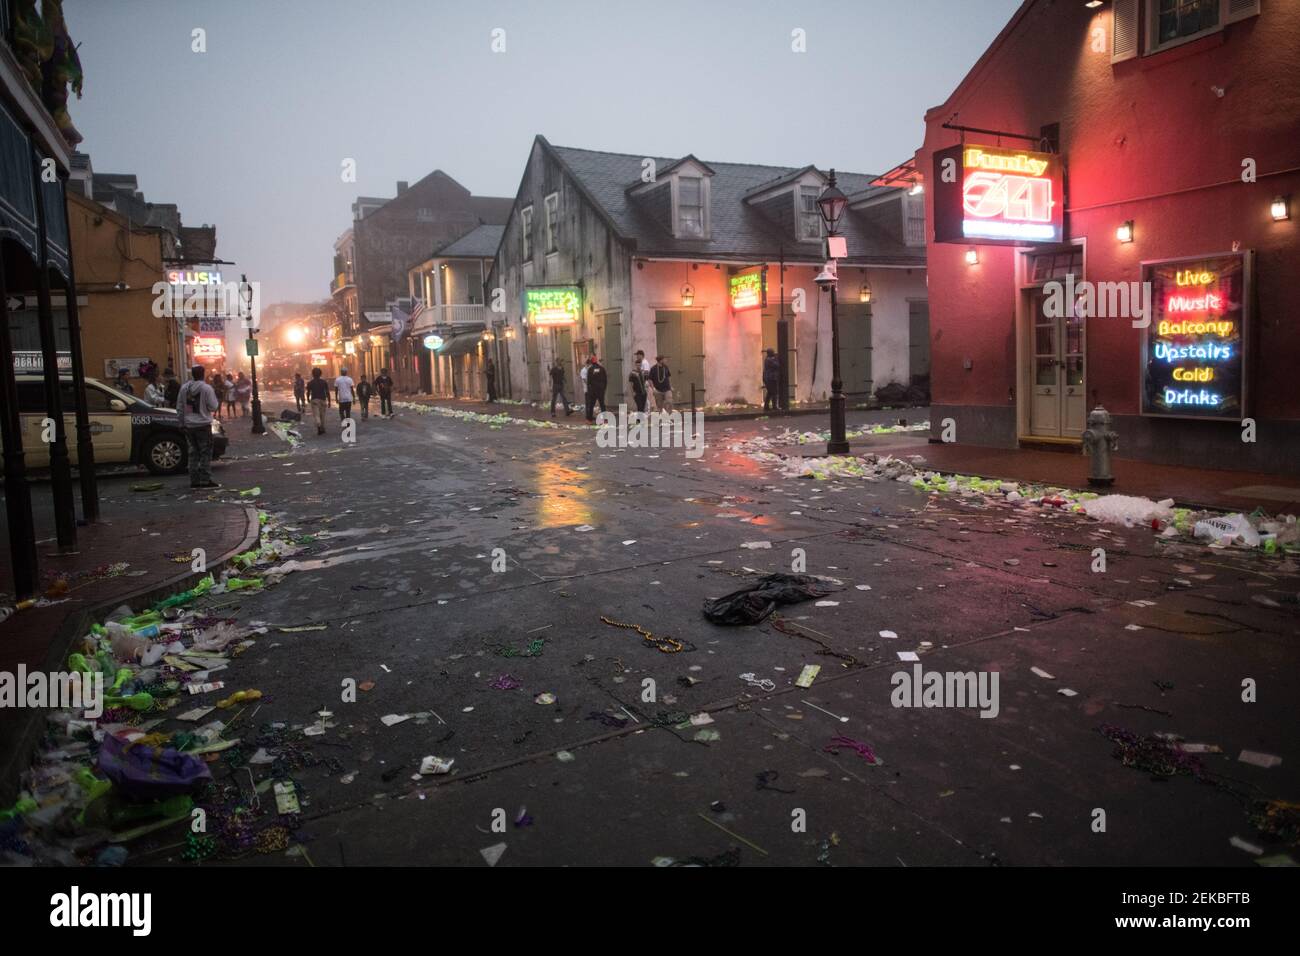 Trash-filled streets morning after Mardi Gras, New Orleans, Louisiana, USA. Stock Photo